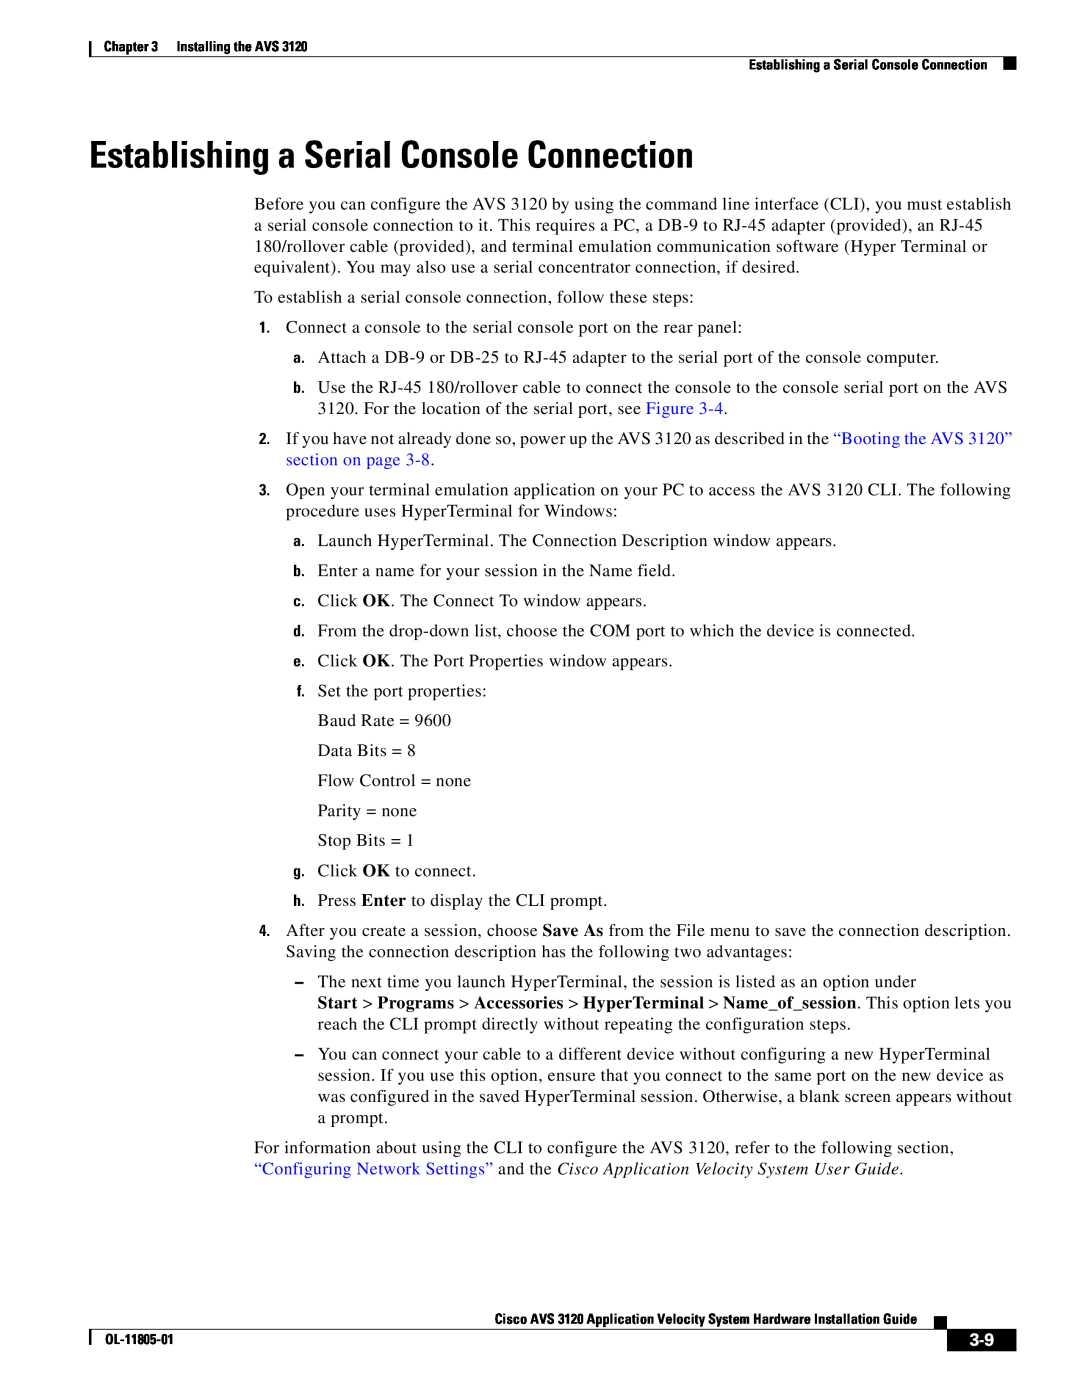 Cisco Systems AVS 3120 installation instructions Establishing a Serial Console Connection 